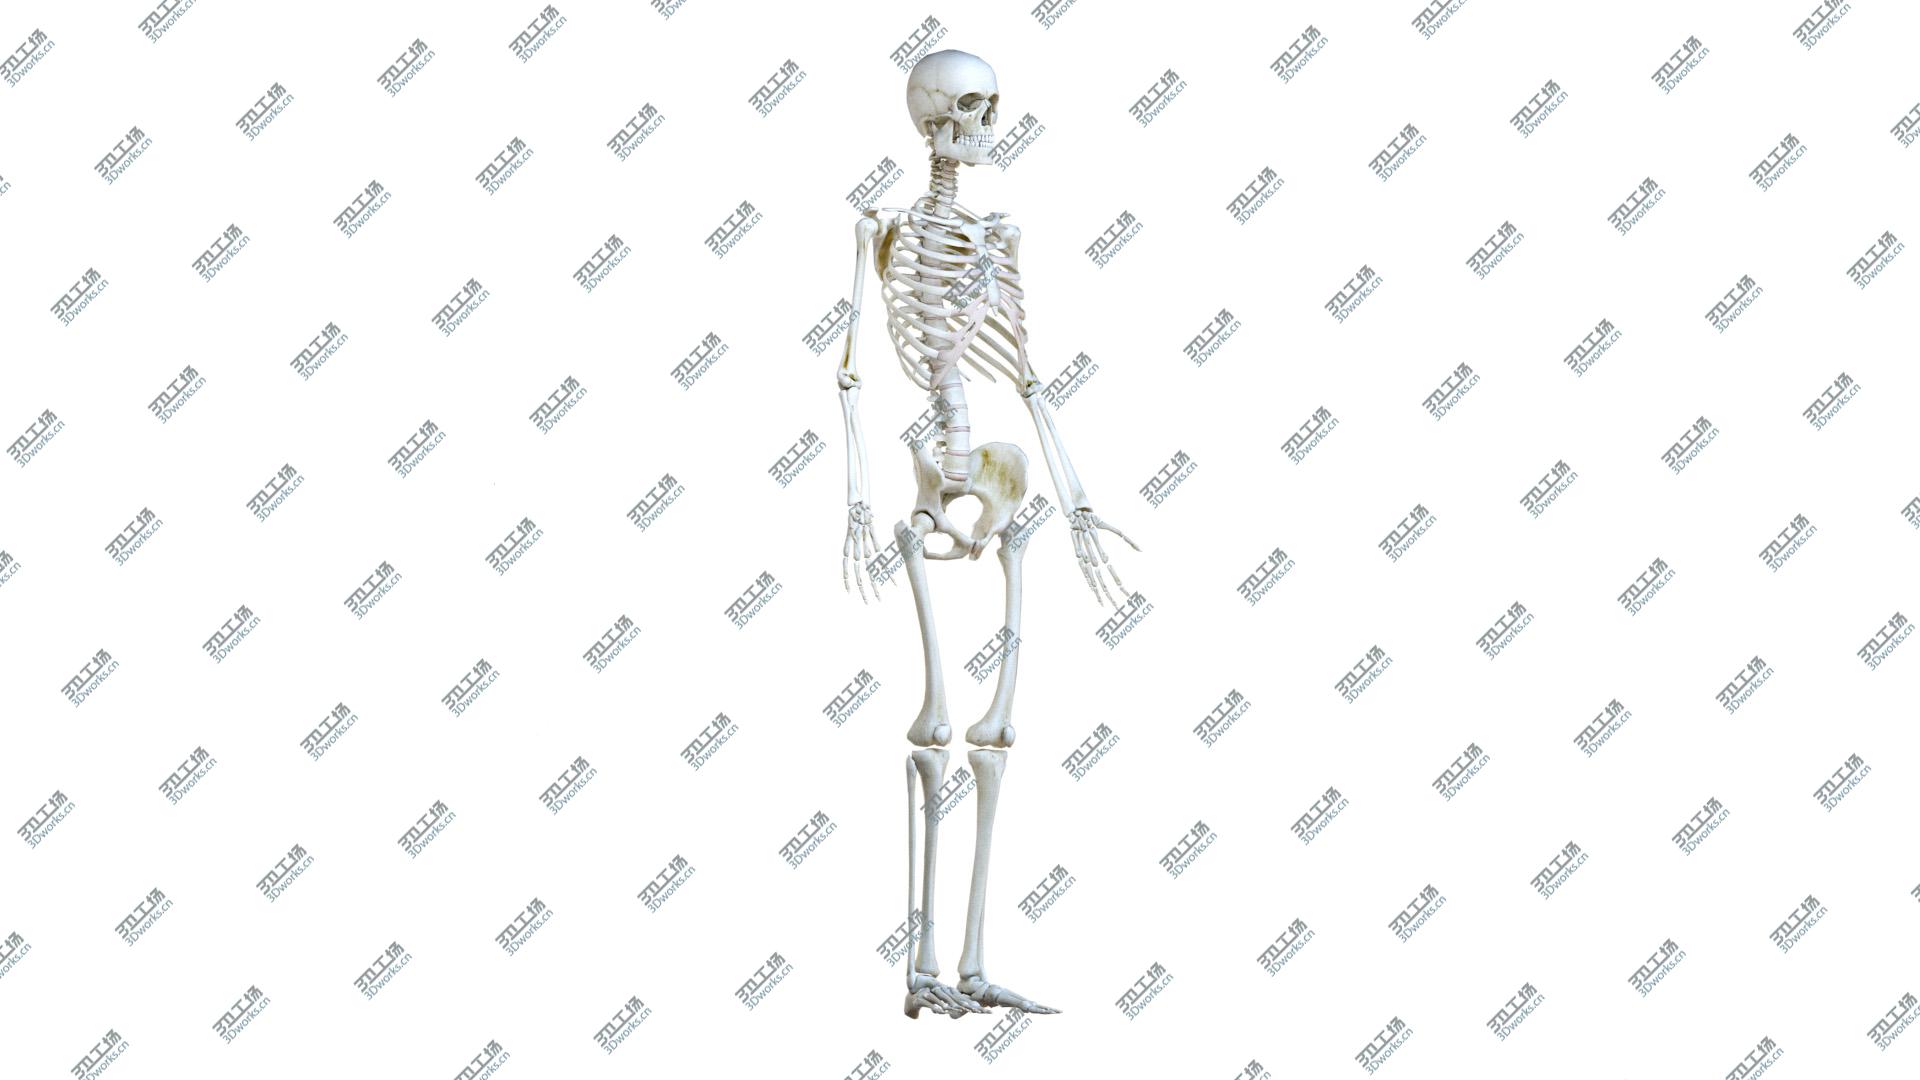 images/goods_img/202104093/3D Male Body and Skeleton (Low Poly) model/3.jpg